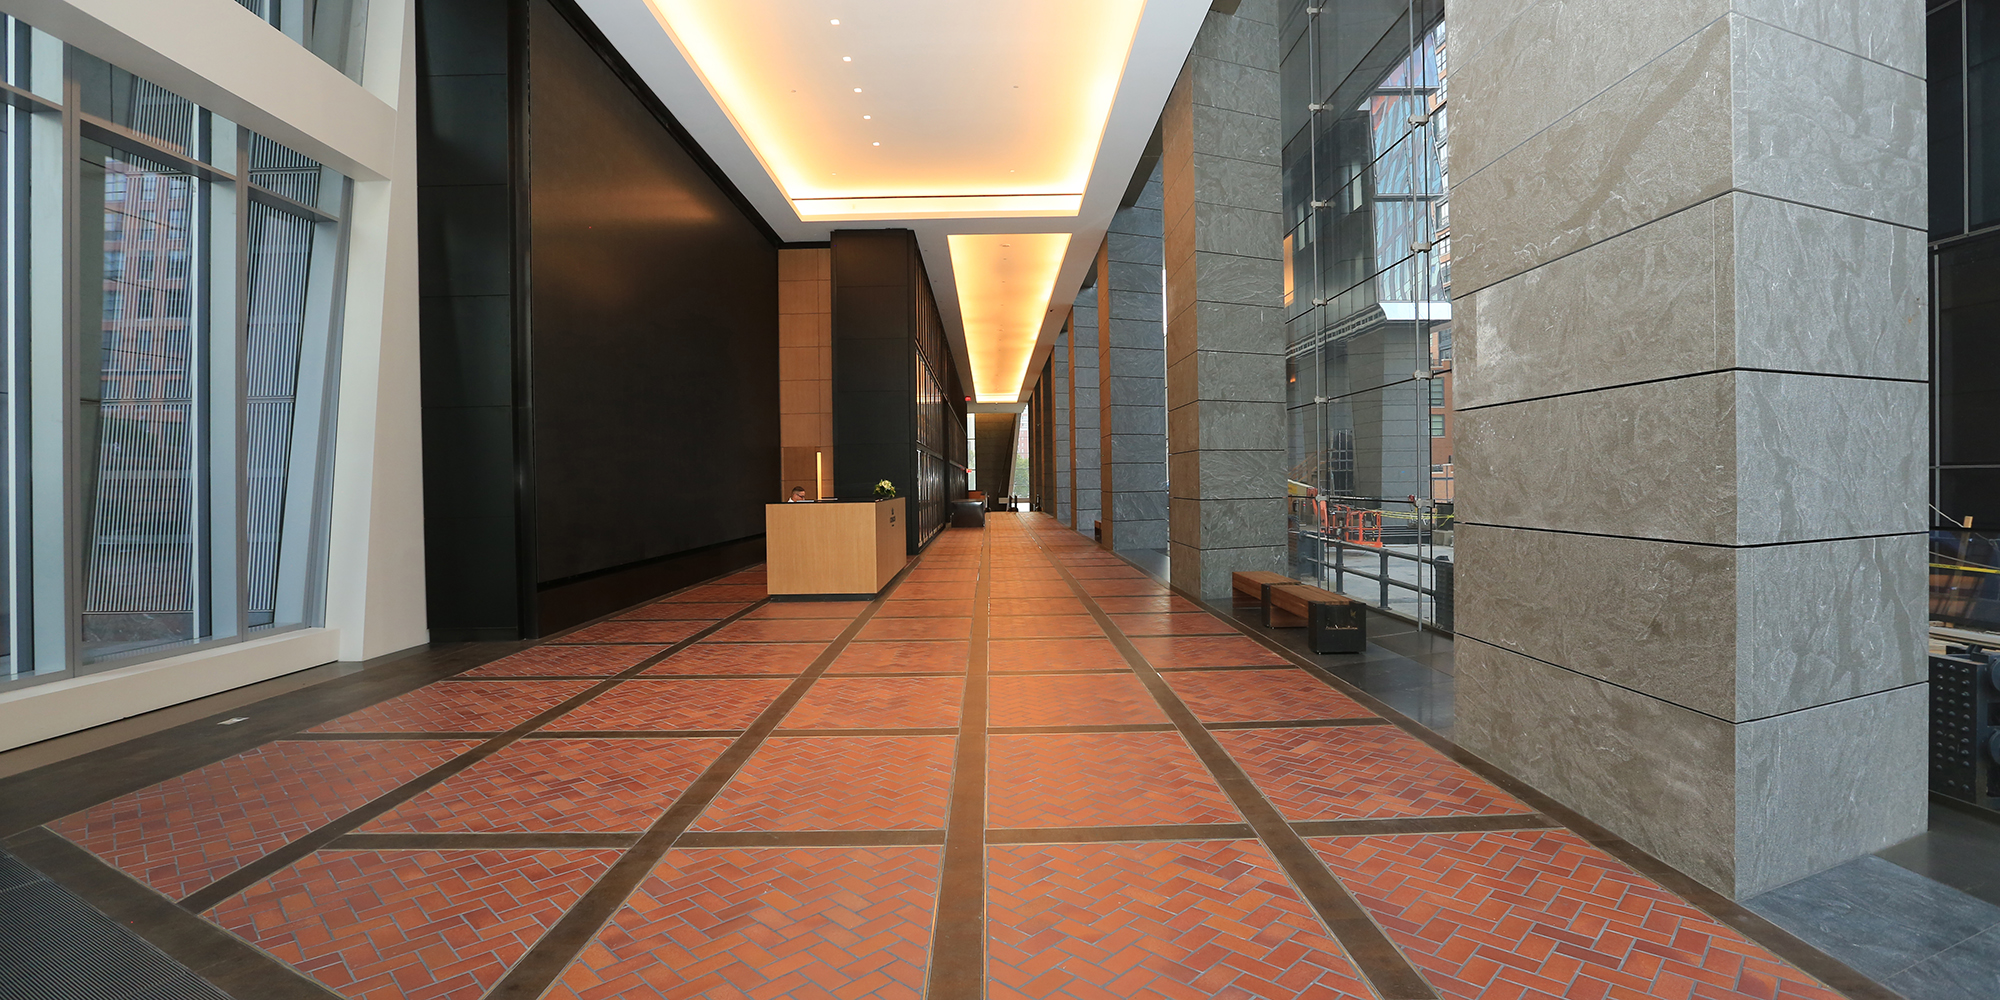 The lobby of the 10 Hudson Yards building of the Hudson Yards development  on Monday, April 11, 2022. The building is home to Tapestry, parent company  of Coach, Kate Spade and Stuart